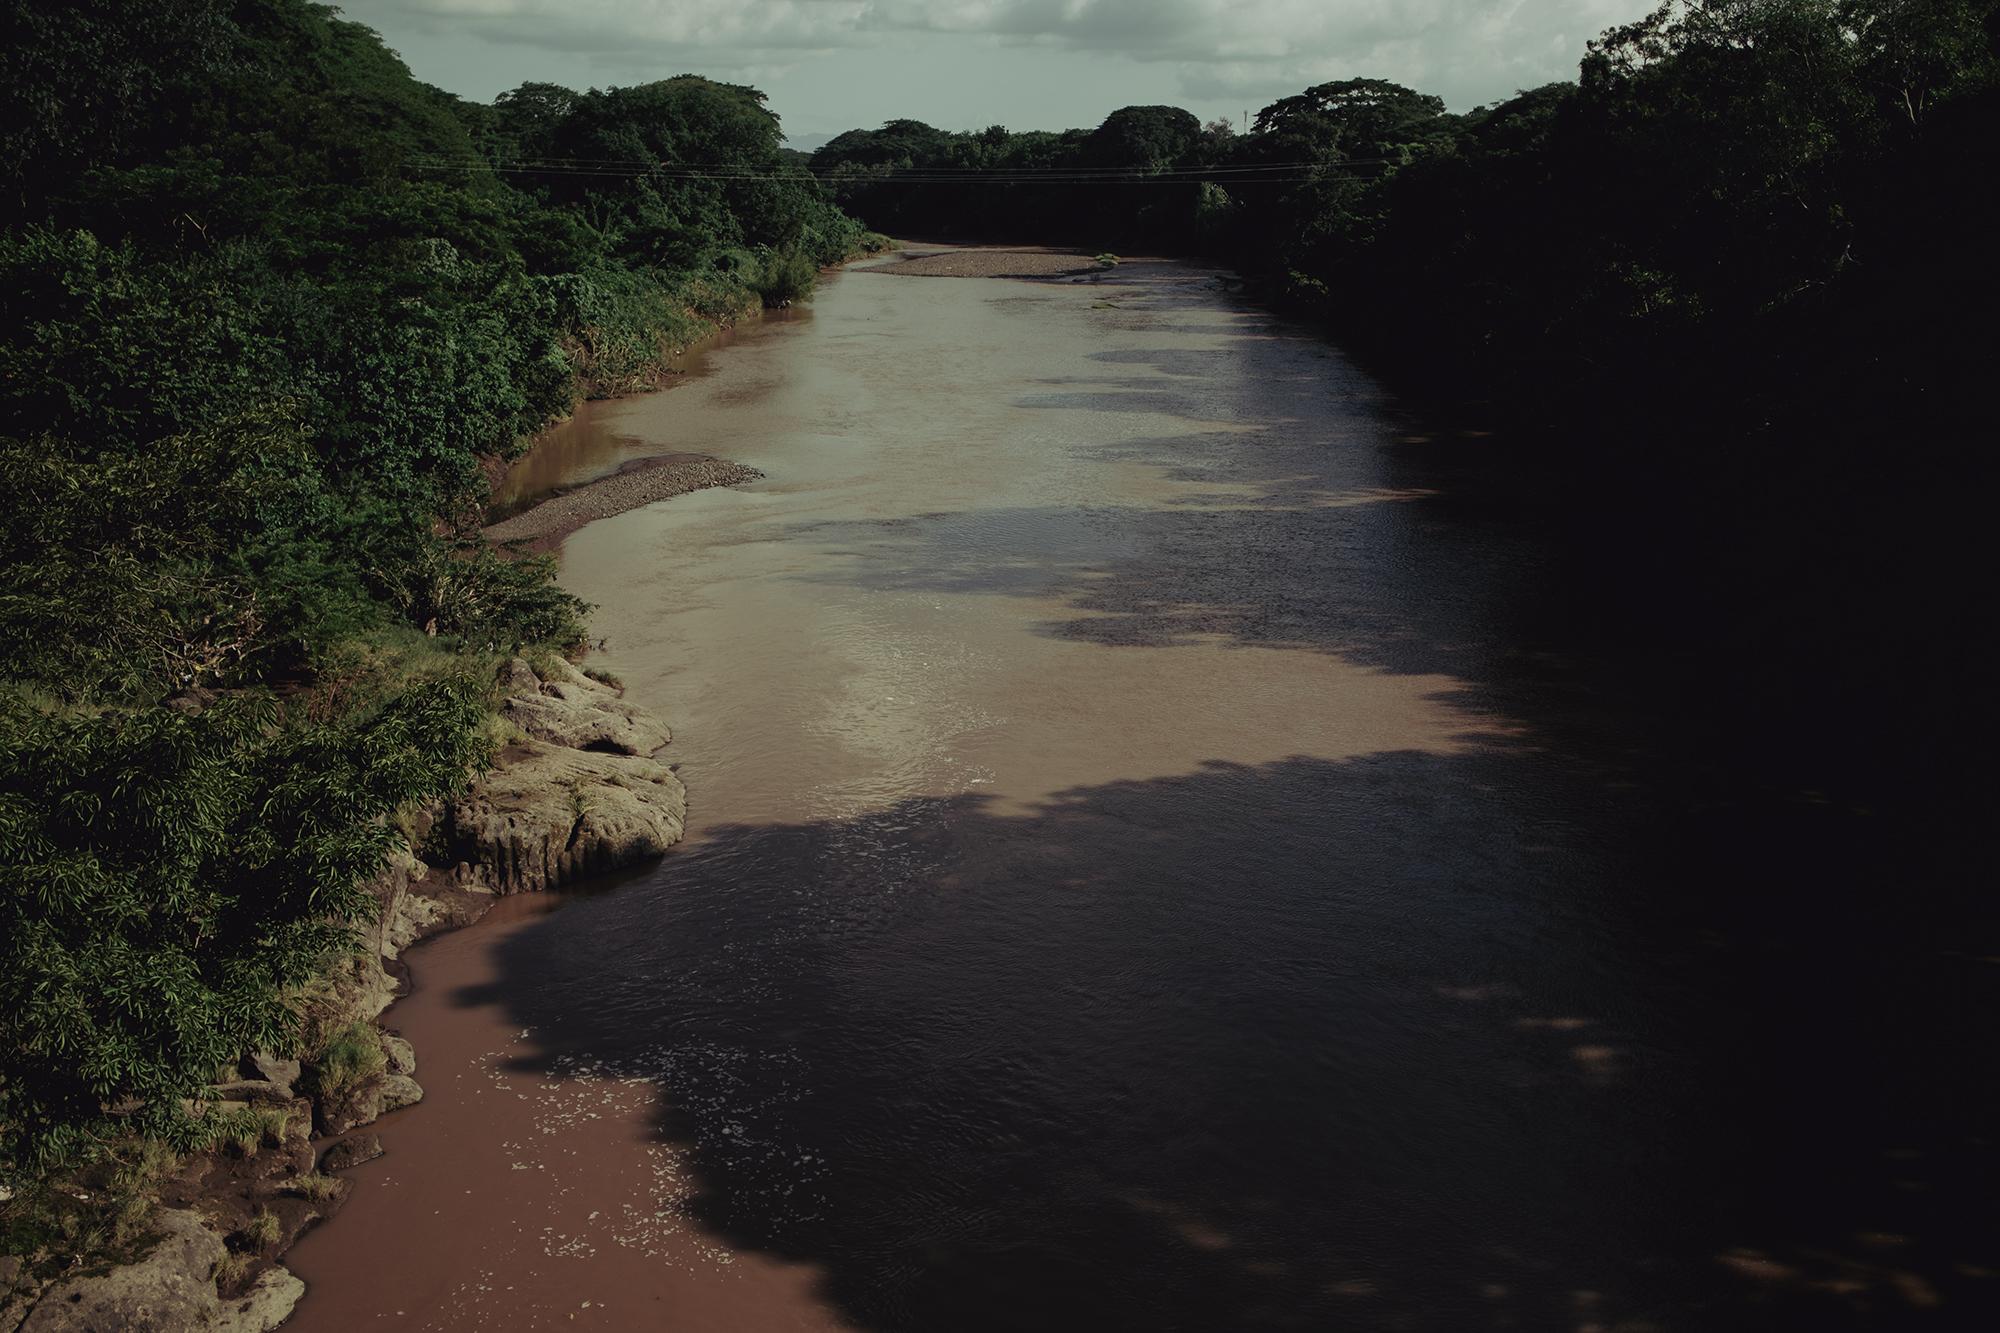 The banks of the Río Grande span four departments in eastern El Salvador: Morazán, San Miguel, La Unión, and Usulután. The community of Urbina 2, San Miguel, is located along the right-side bank pictured above. Each successive river swell threatens to level the community. The families have fled to elevated ground on the opposite side. 